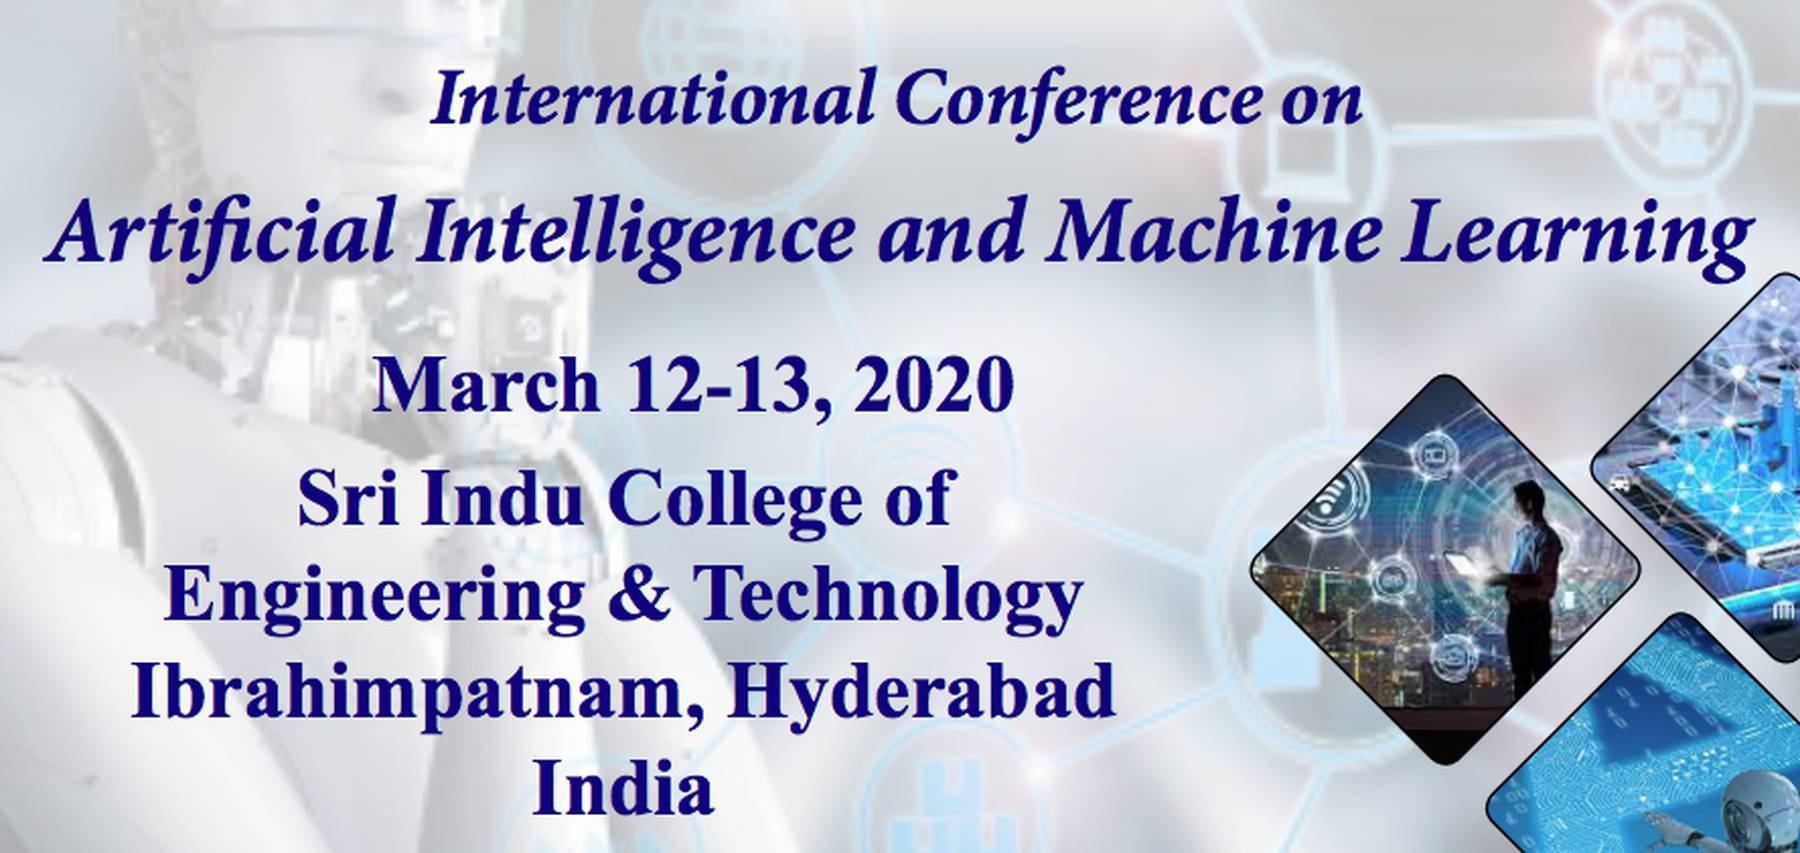 International Conference on Artificial Intelligence and Machine Learning India 2020